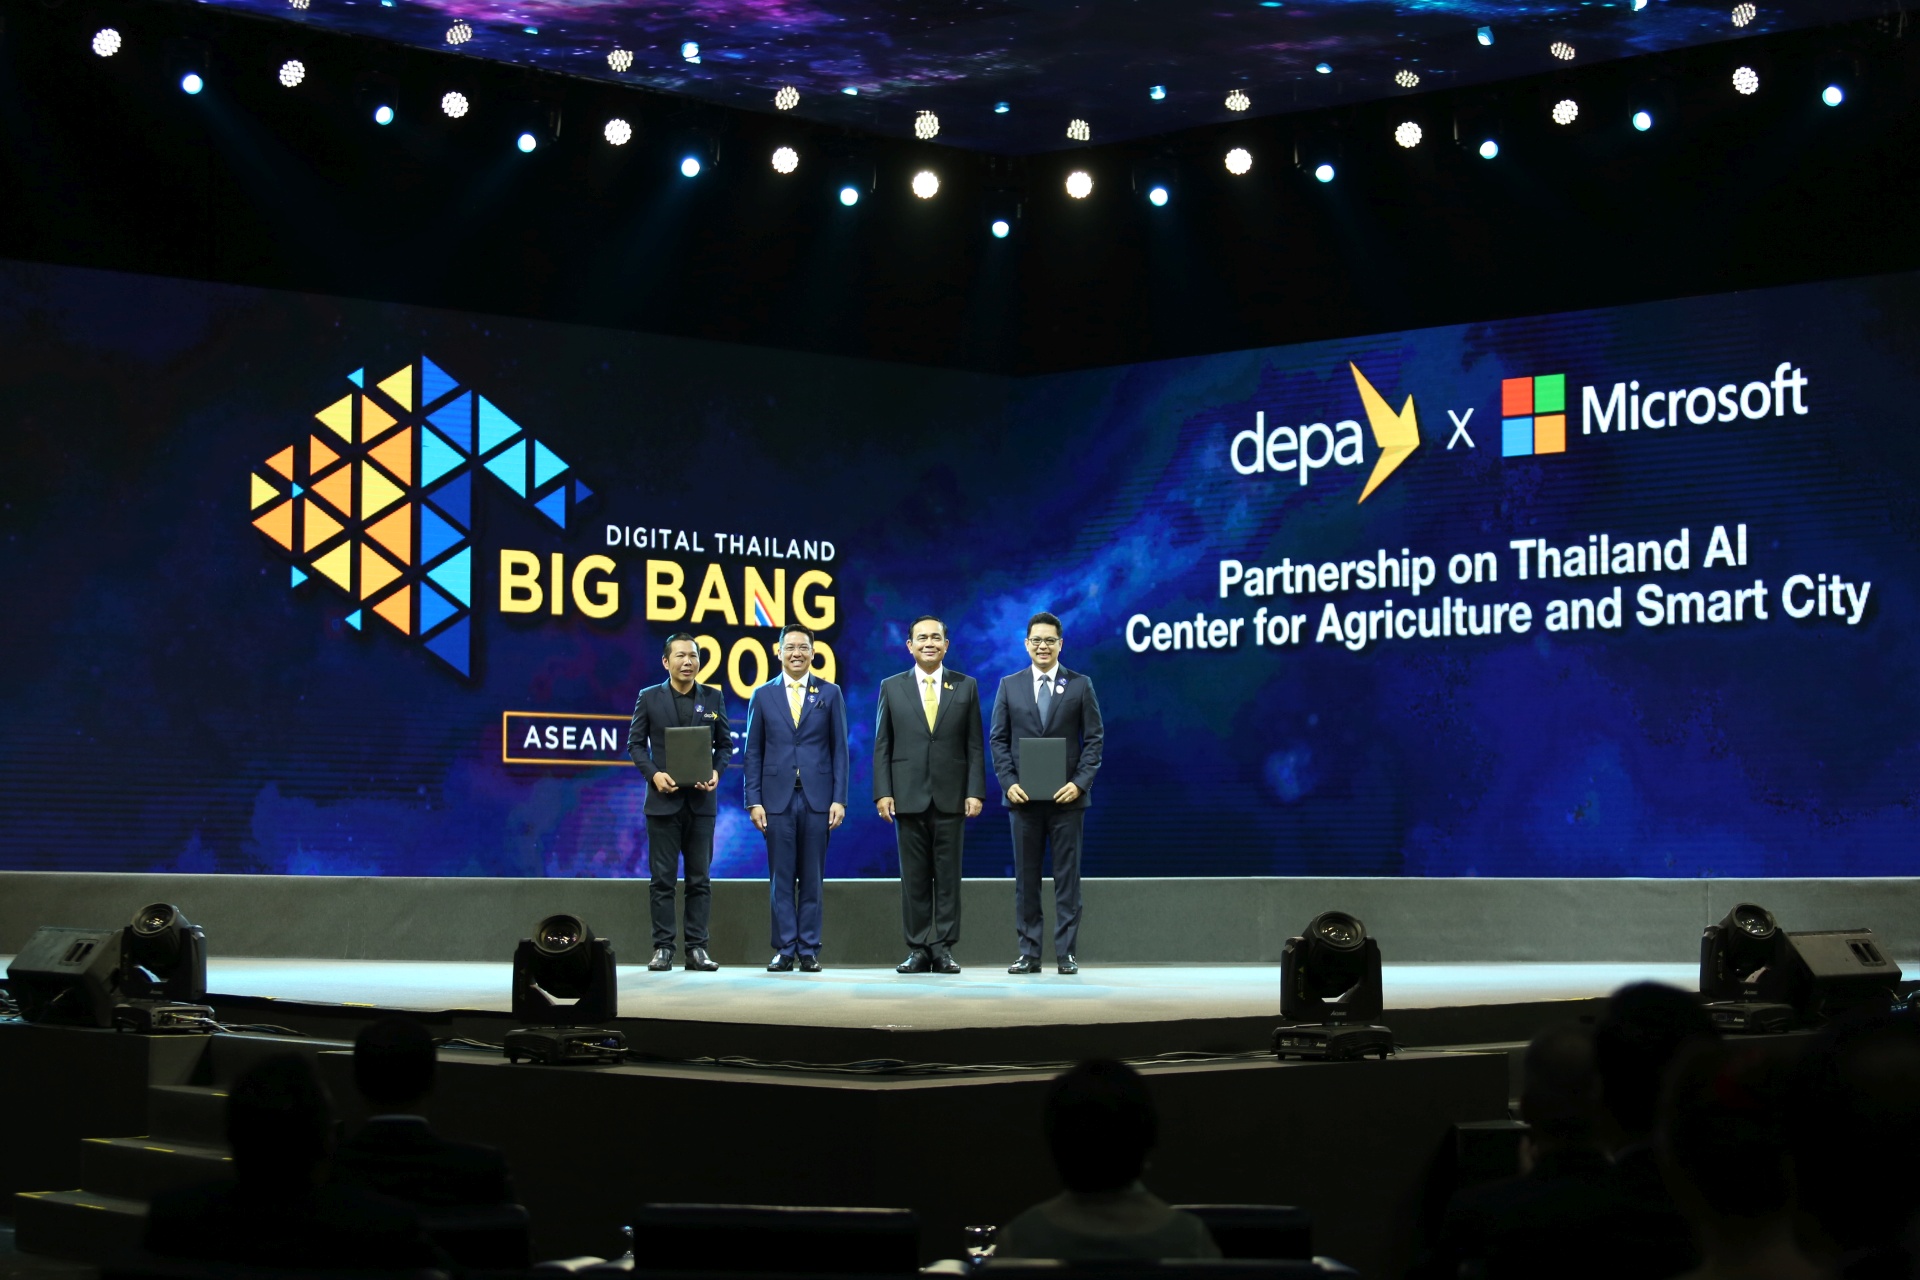 Executives on large stage